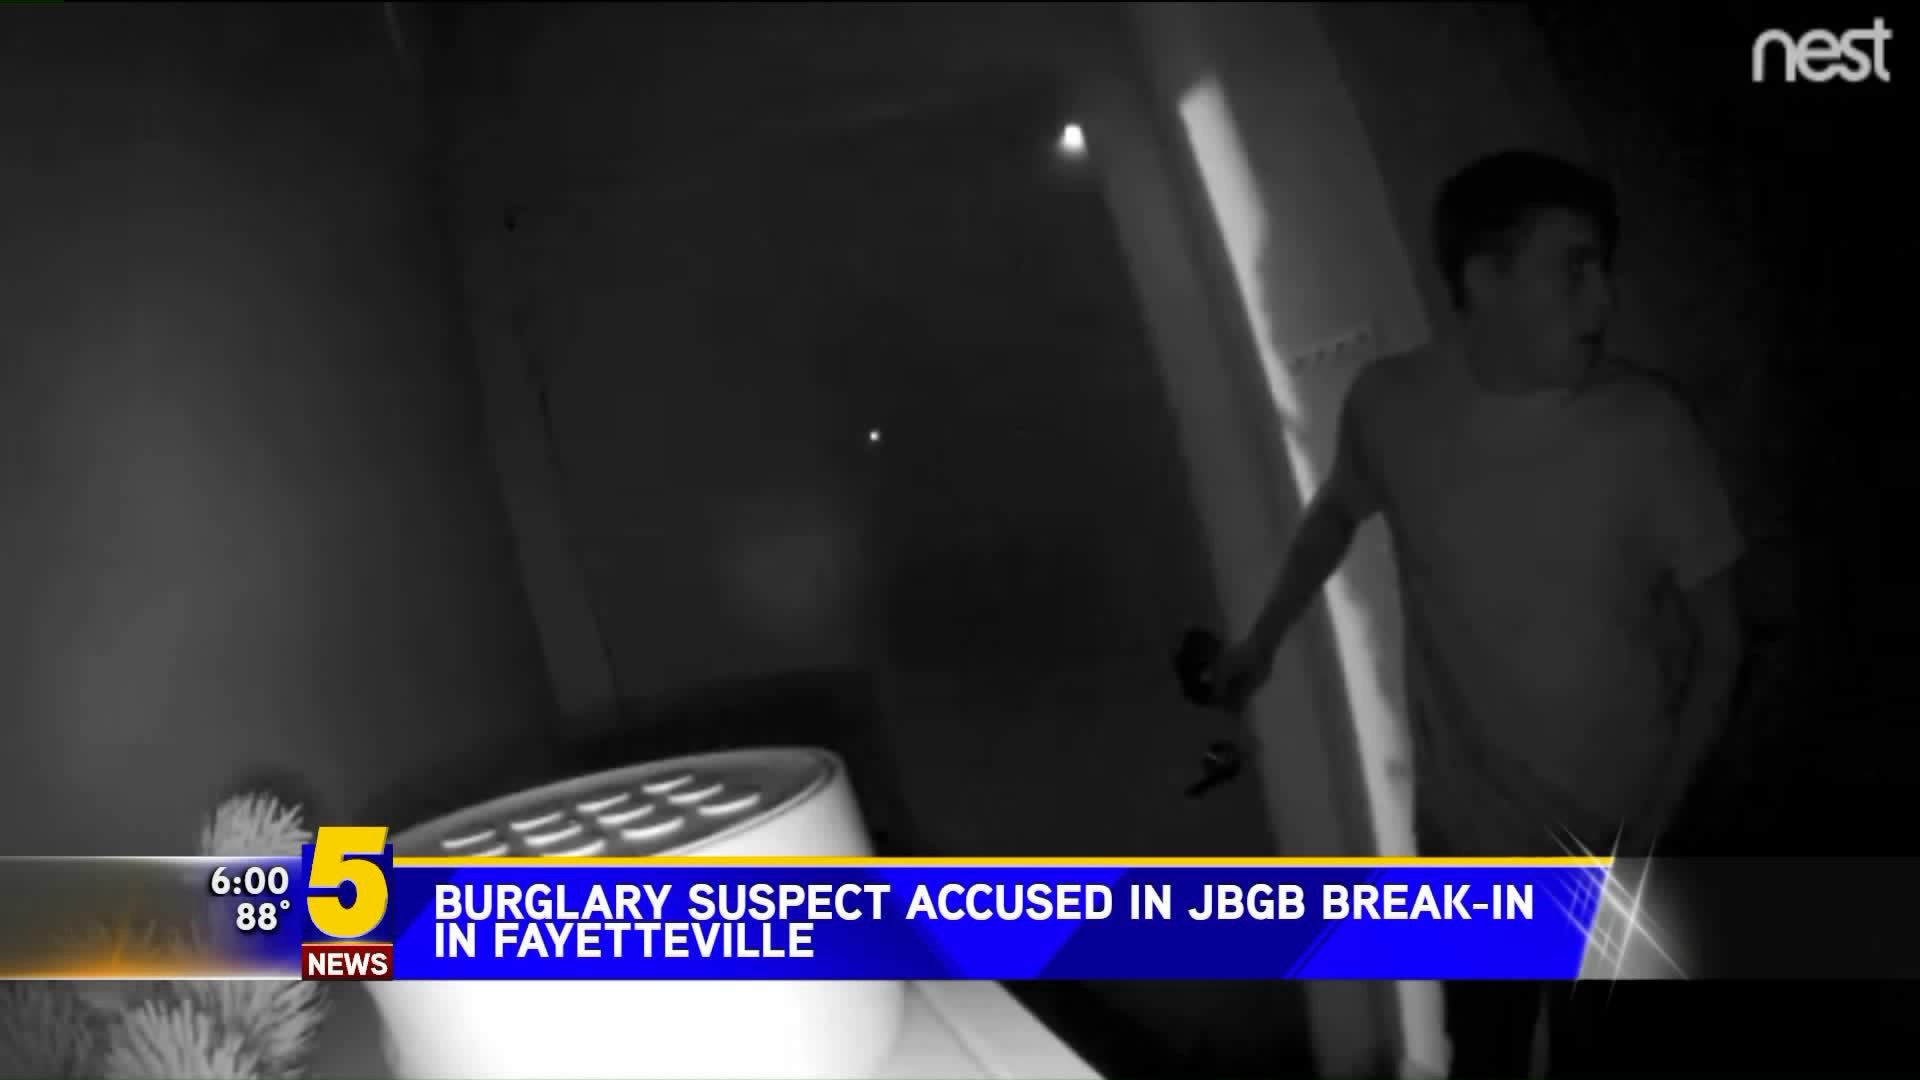 Burglary Suspect Connected To Other Break-ins In Fayetteville